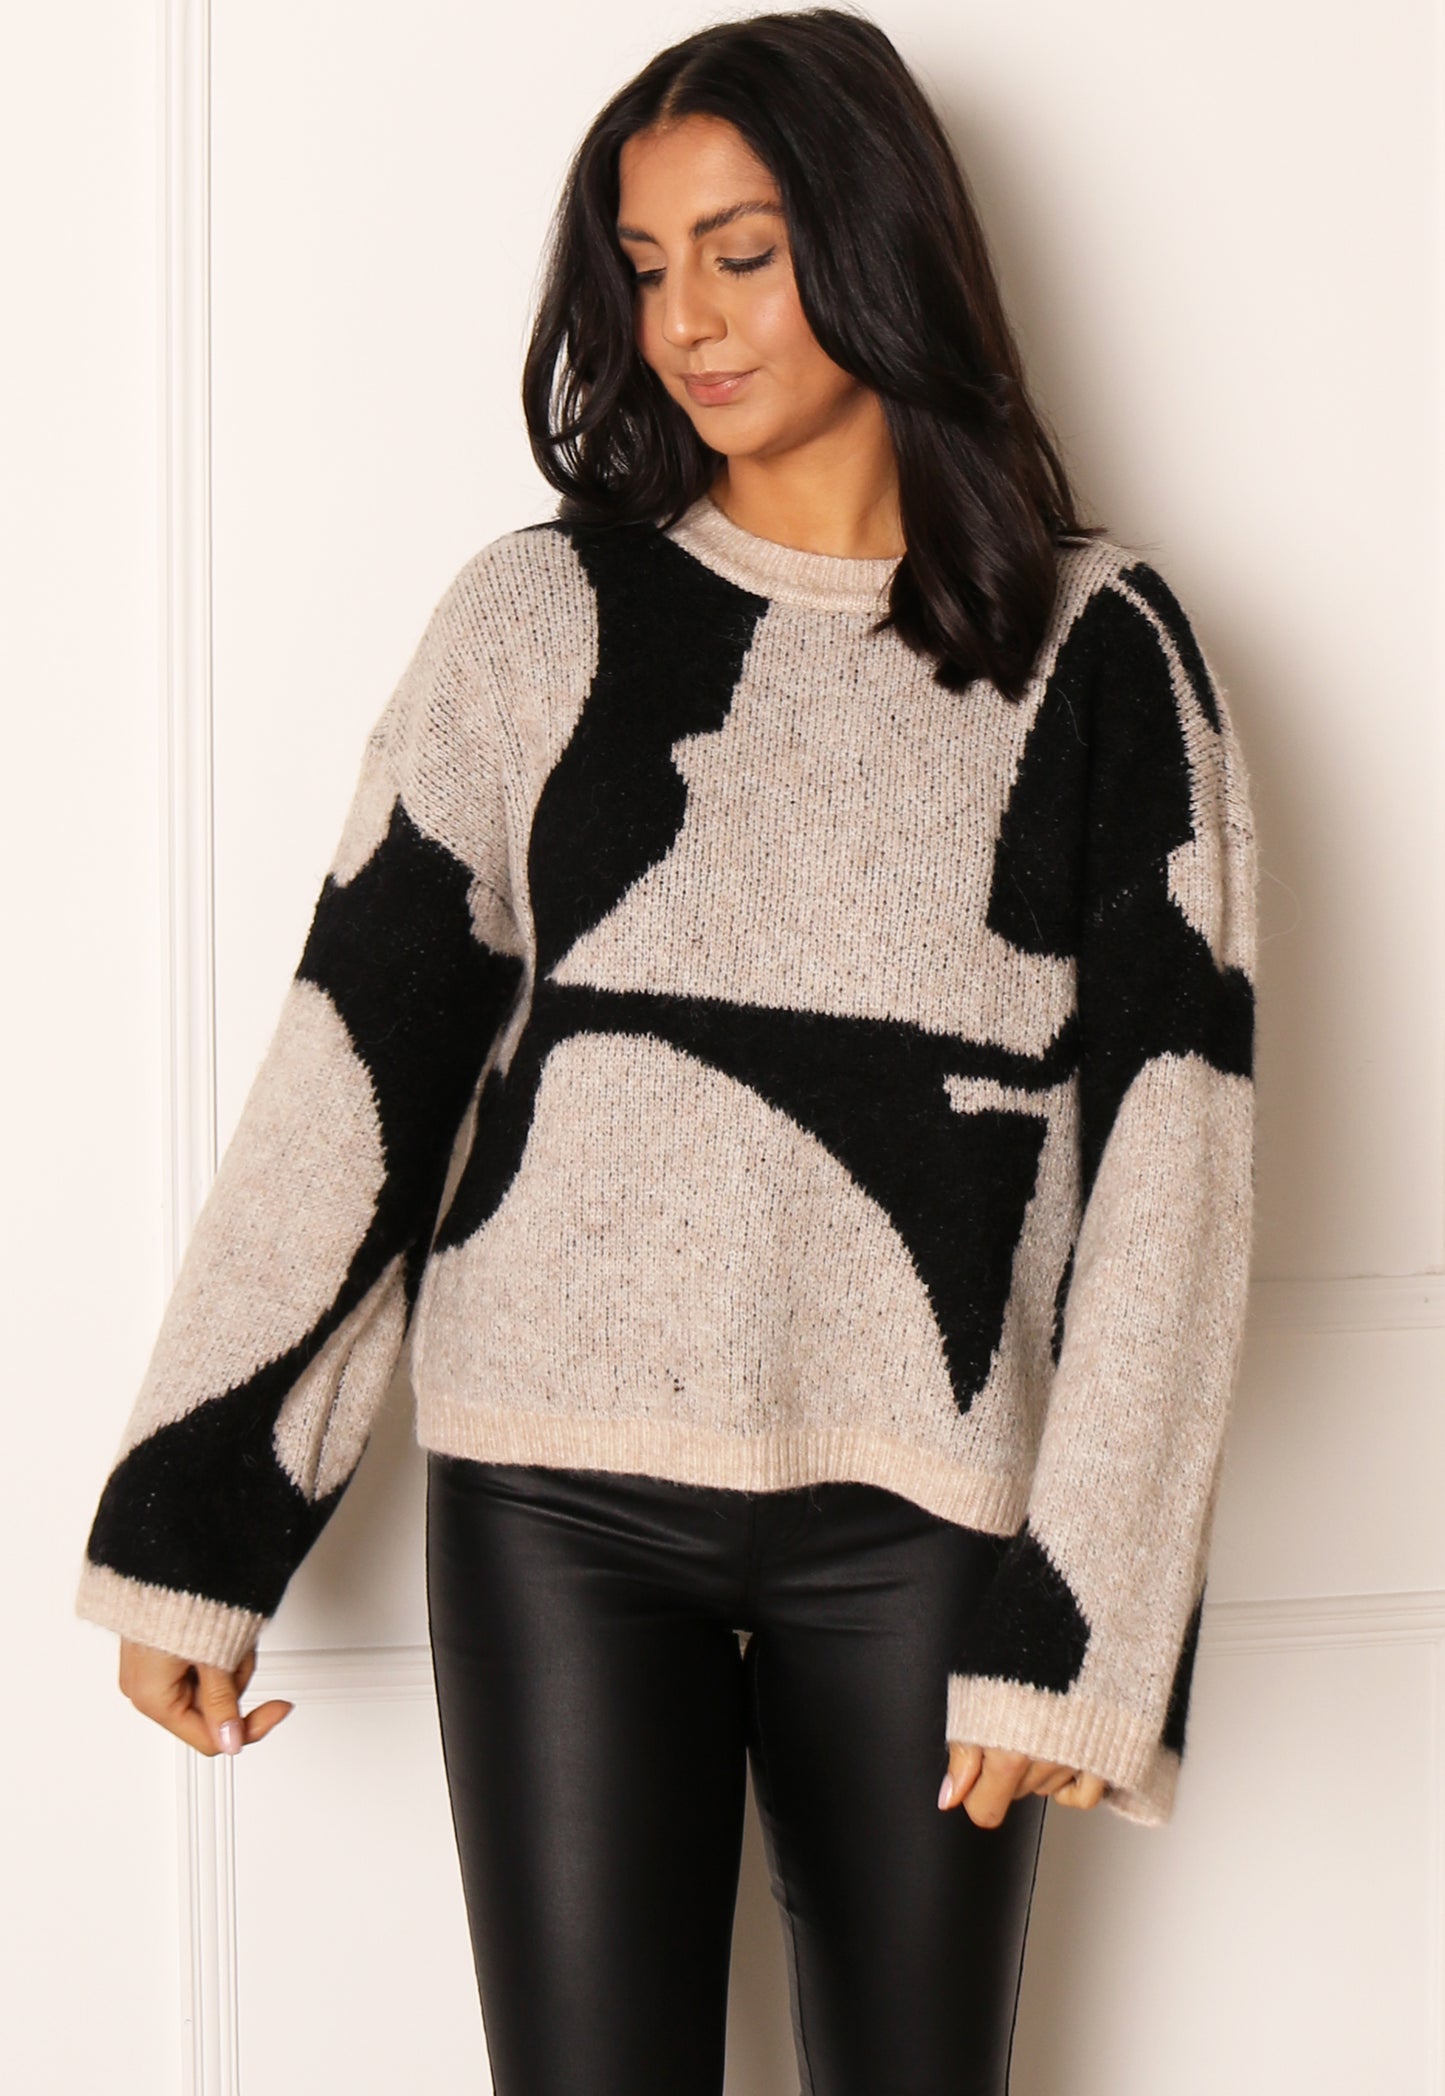 VILA Fluffy Abstract Colour Block Chunky Knit Jumper in Beige & Black - One Nation Clothing